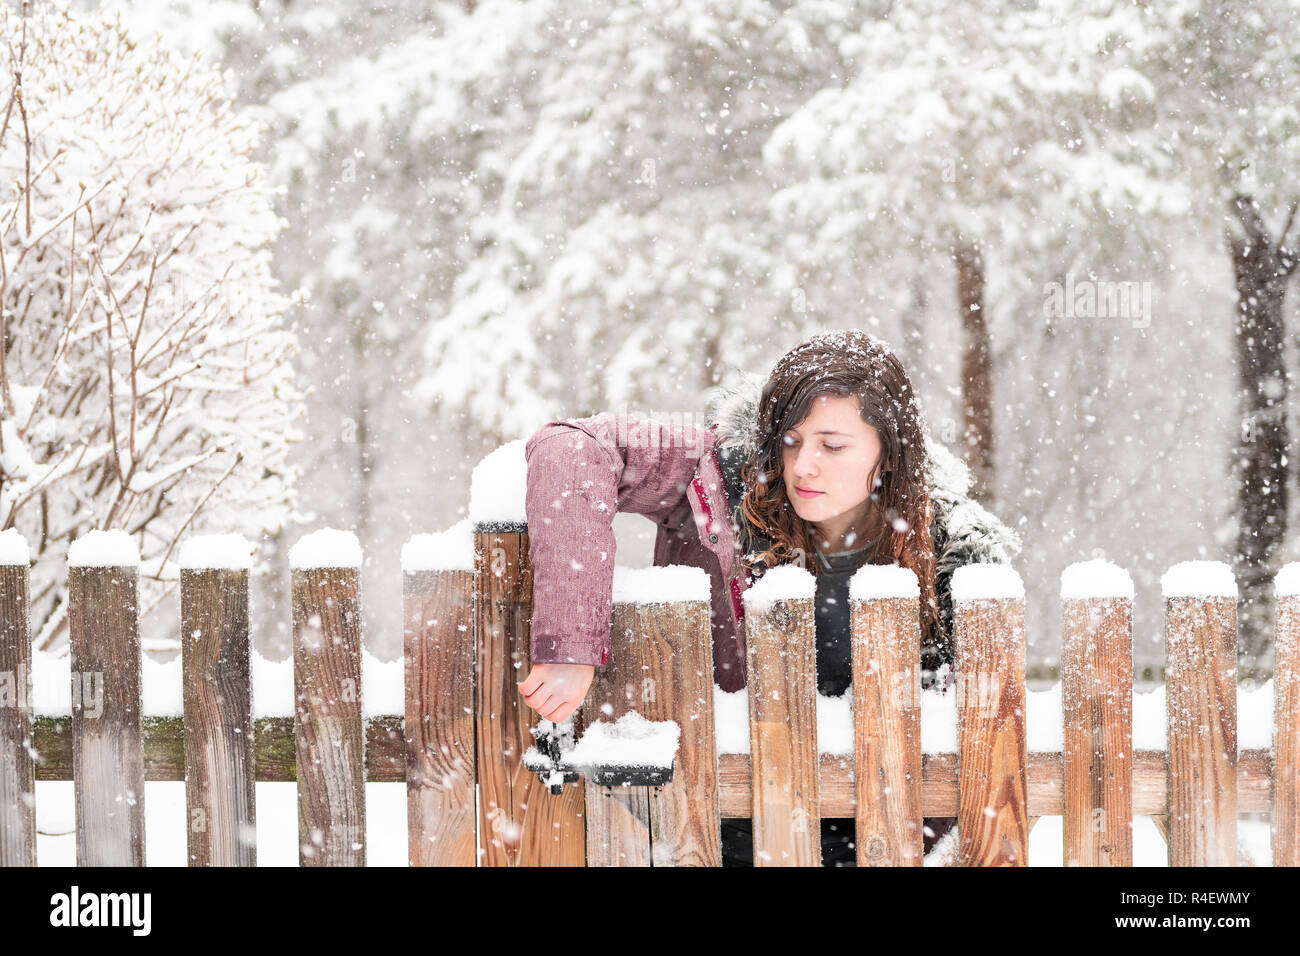 Young woman closeup standing, opening wooden home, house fence gate outside, outdoor front yard, backyard, heavy snowstorm, storm, snowing, falling sn Stock Photo